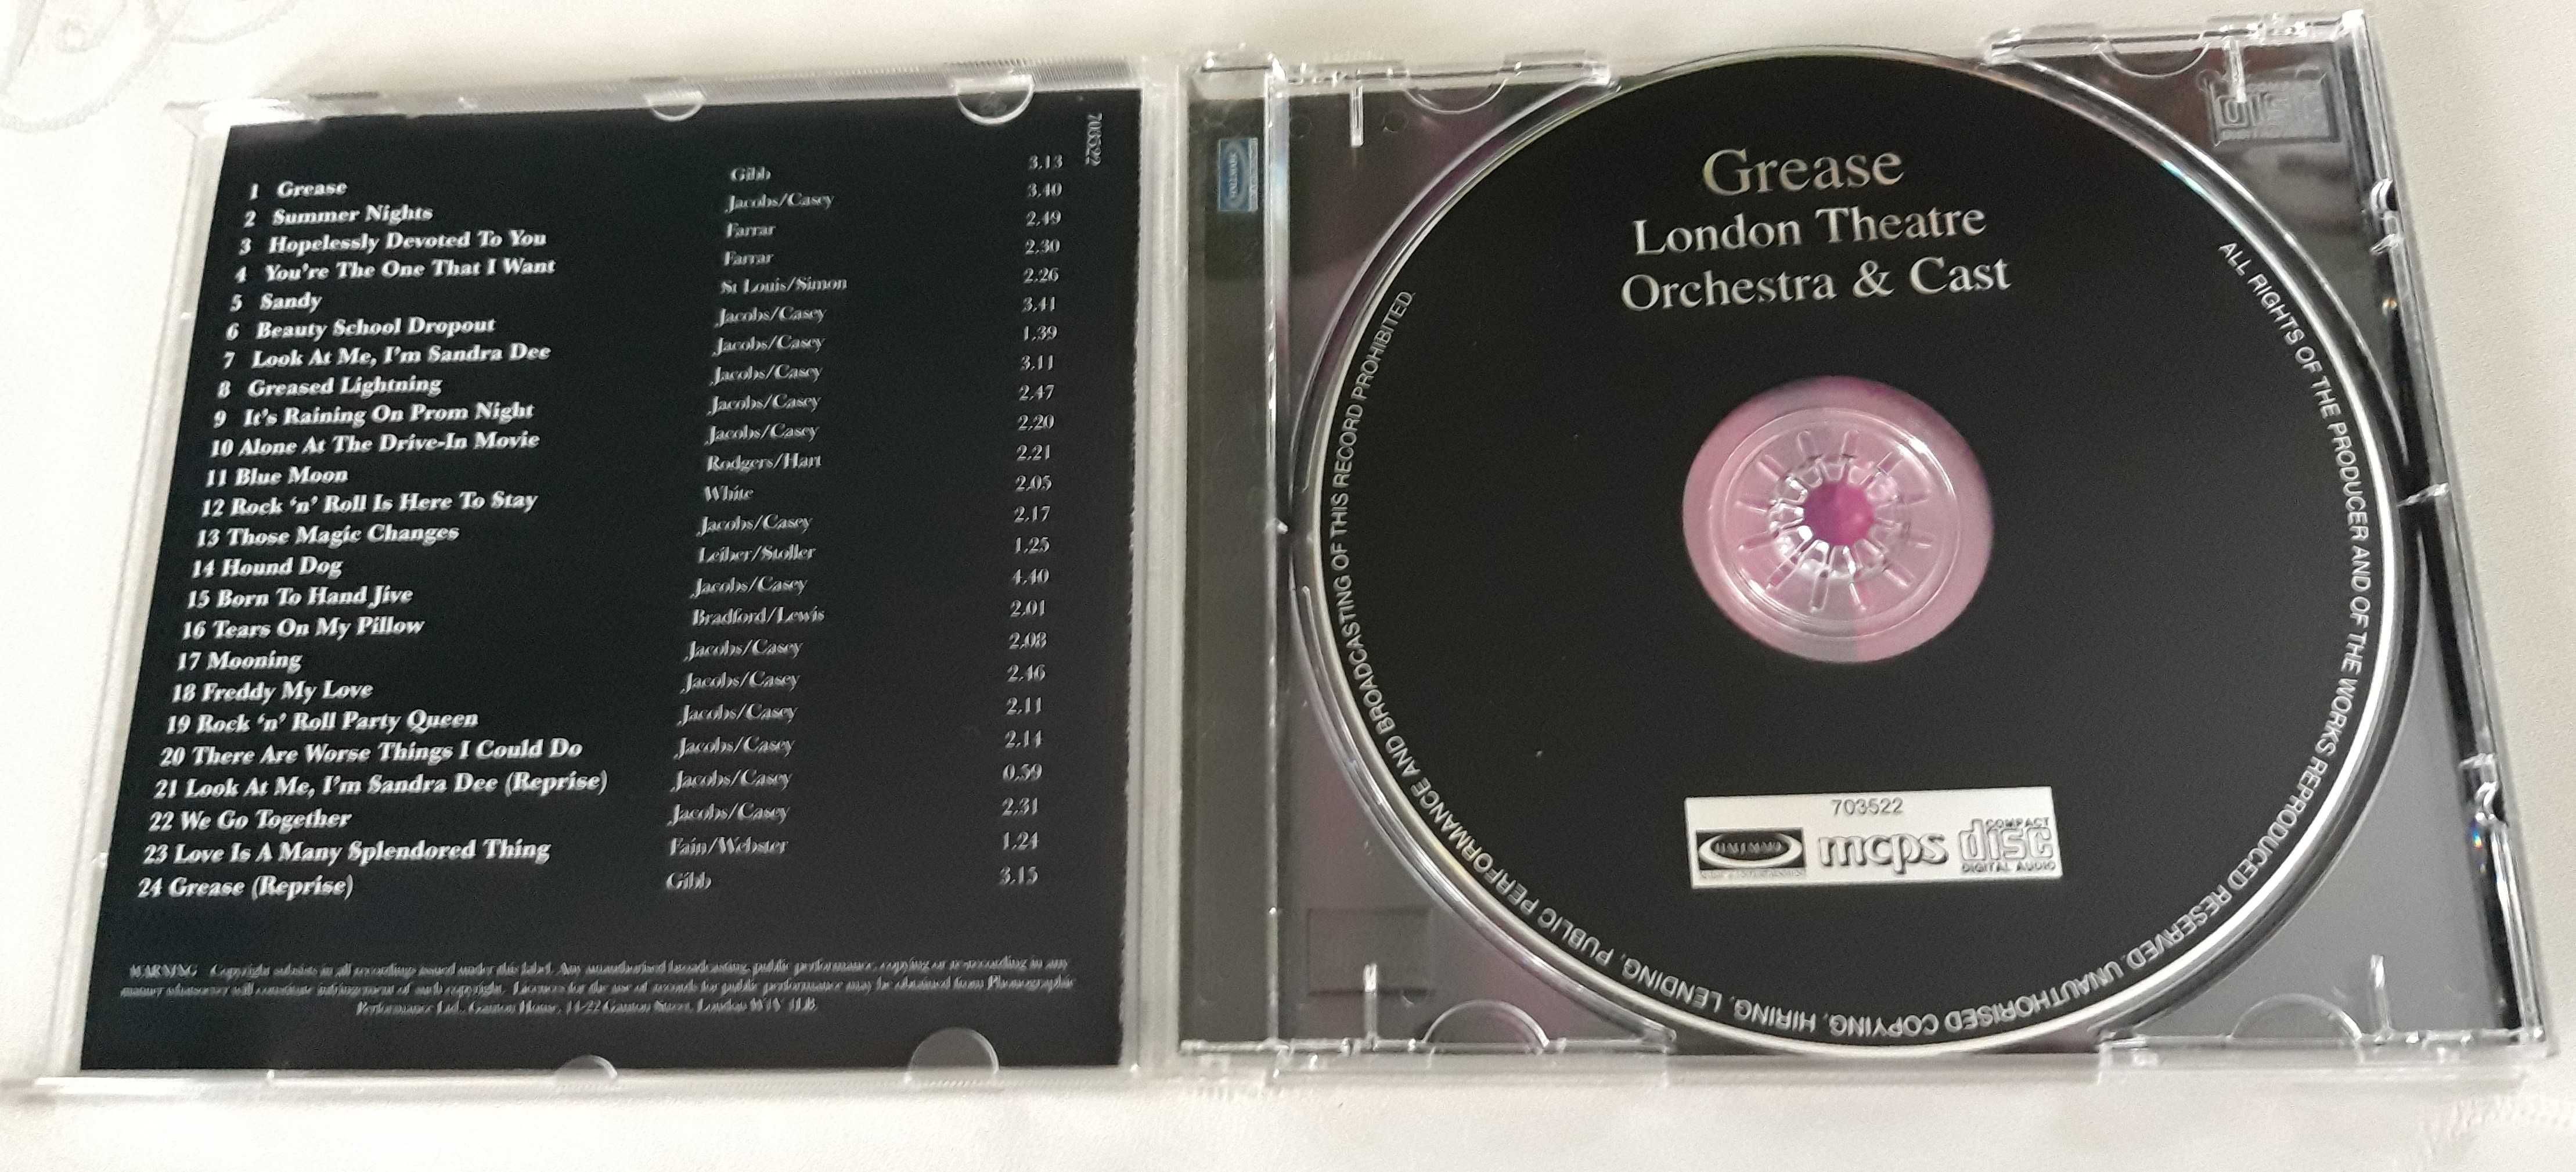 Grease The London Theatre Orchestra & Cast CD